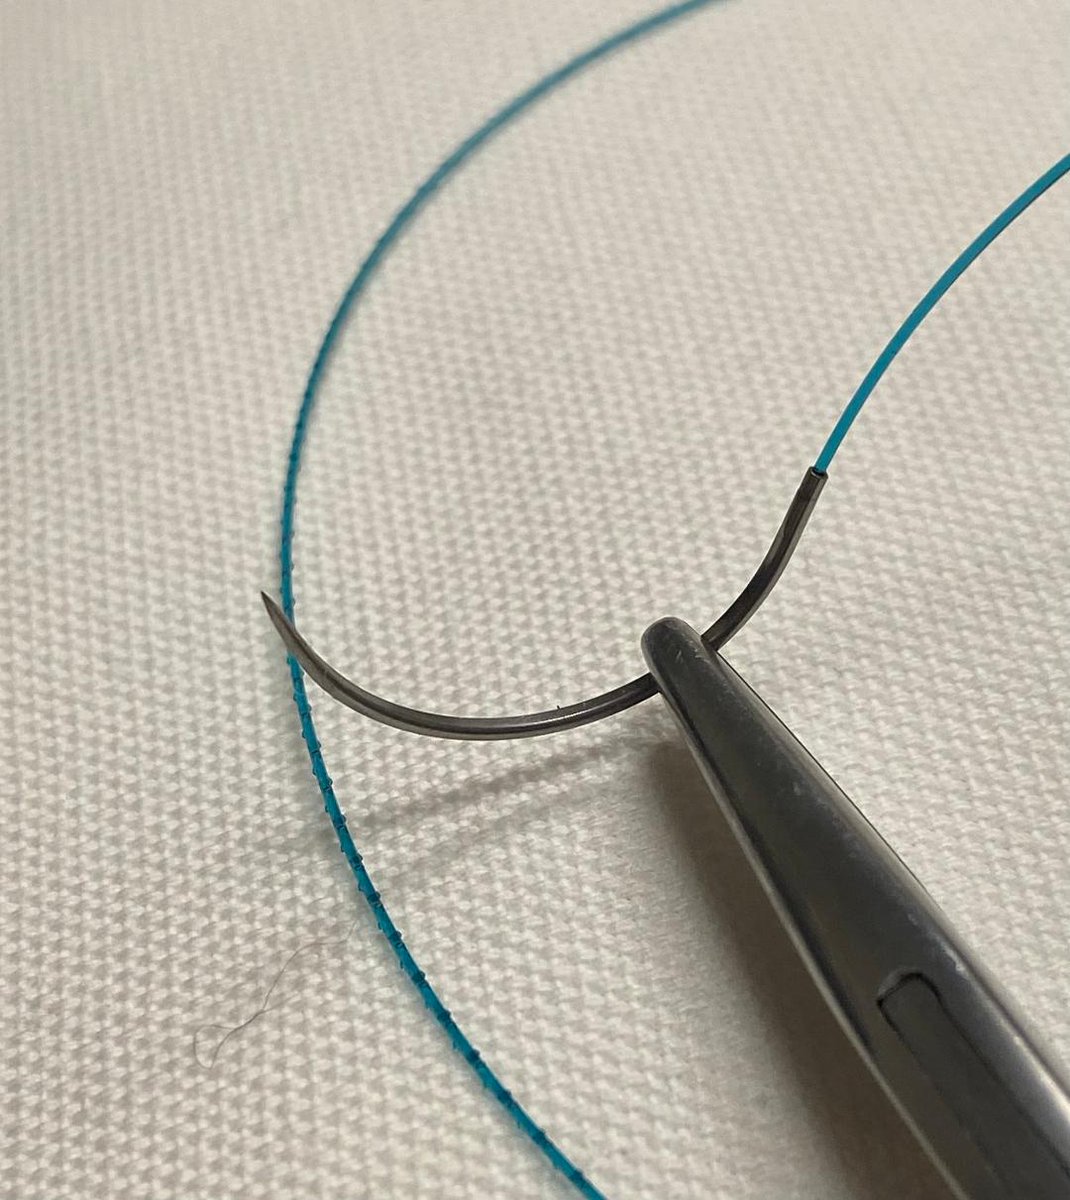 🧵of 🧵: we've already covered most commonly used sutures. Today, we cover barbed sutures. The use of barbs wasn't even invented by humans - they are present in many plant and animal species. But now, barbed sutures are becoming more and more common, as we'll see: (1/ )